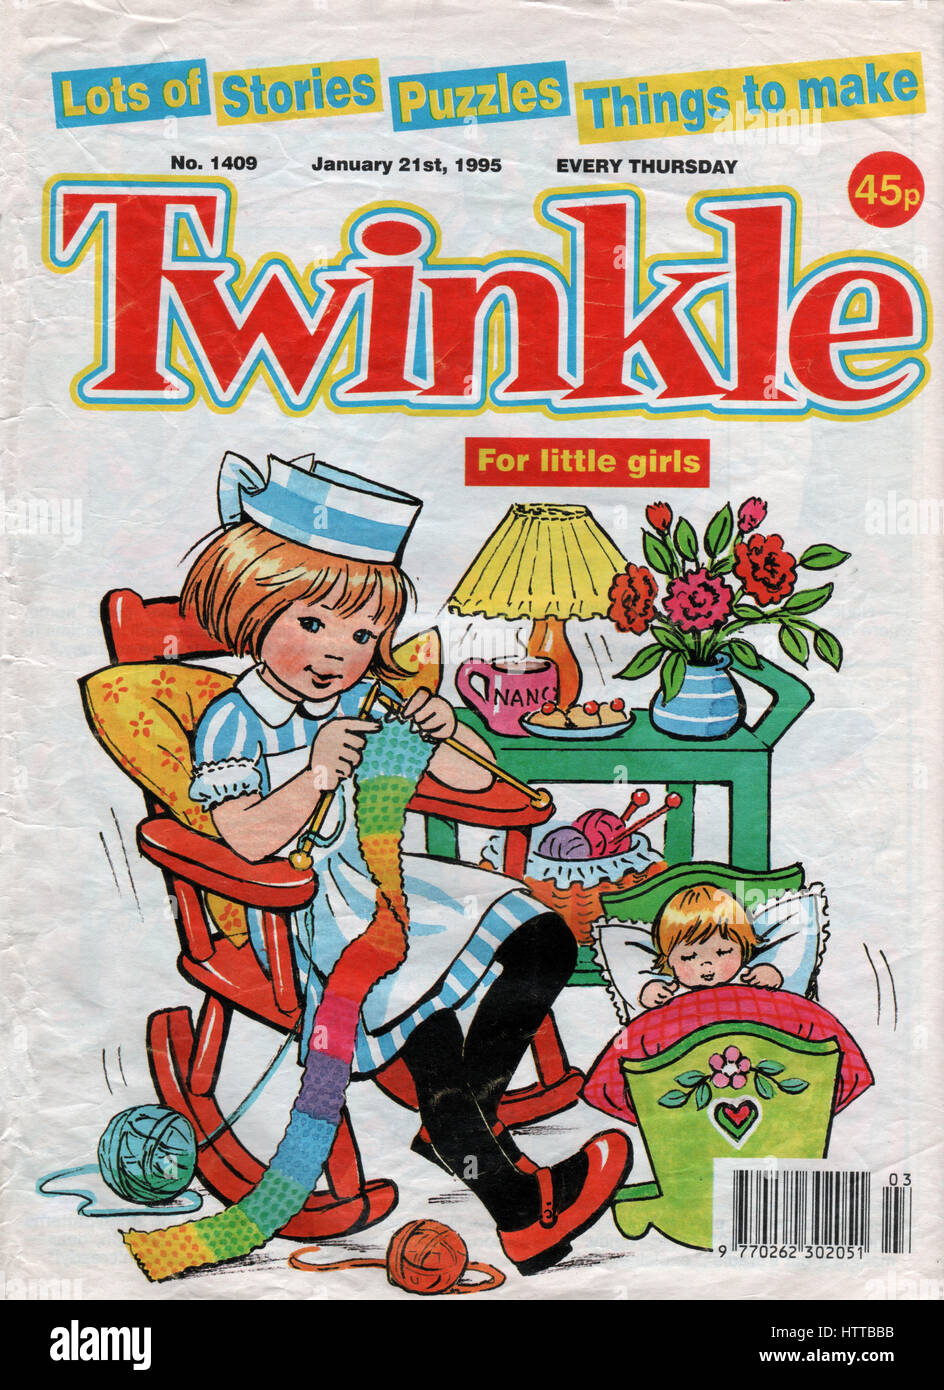 Twinkle comic 'the picture paper specially for little girls' was a weekly publication and ran from 1968 to 1999 and was published by D. C. Thomson Stock Photo